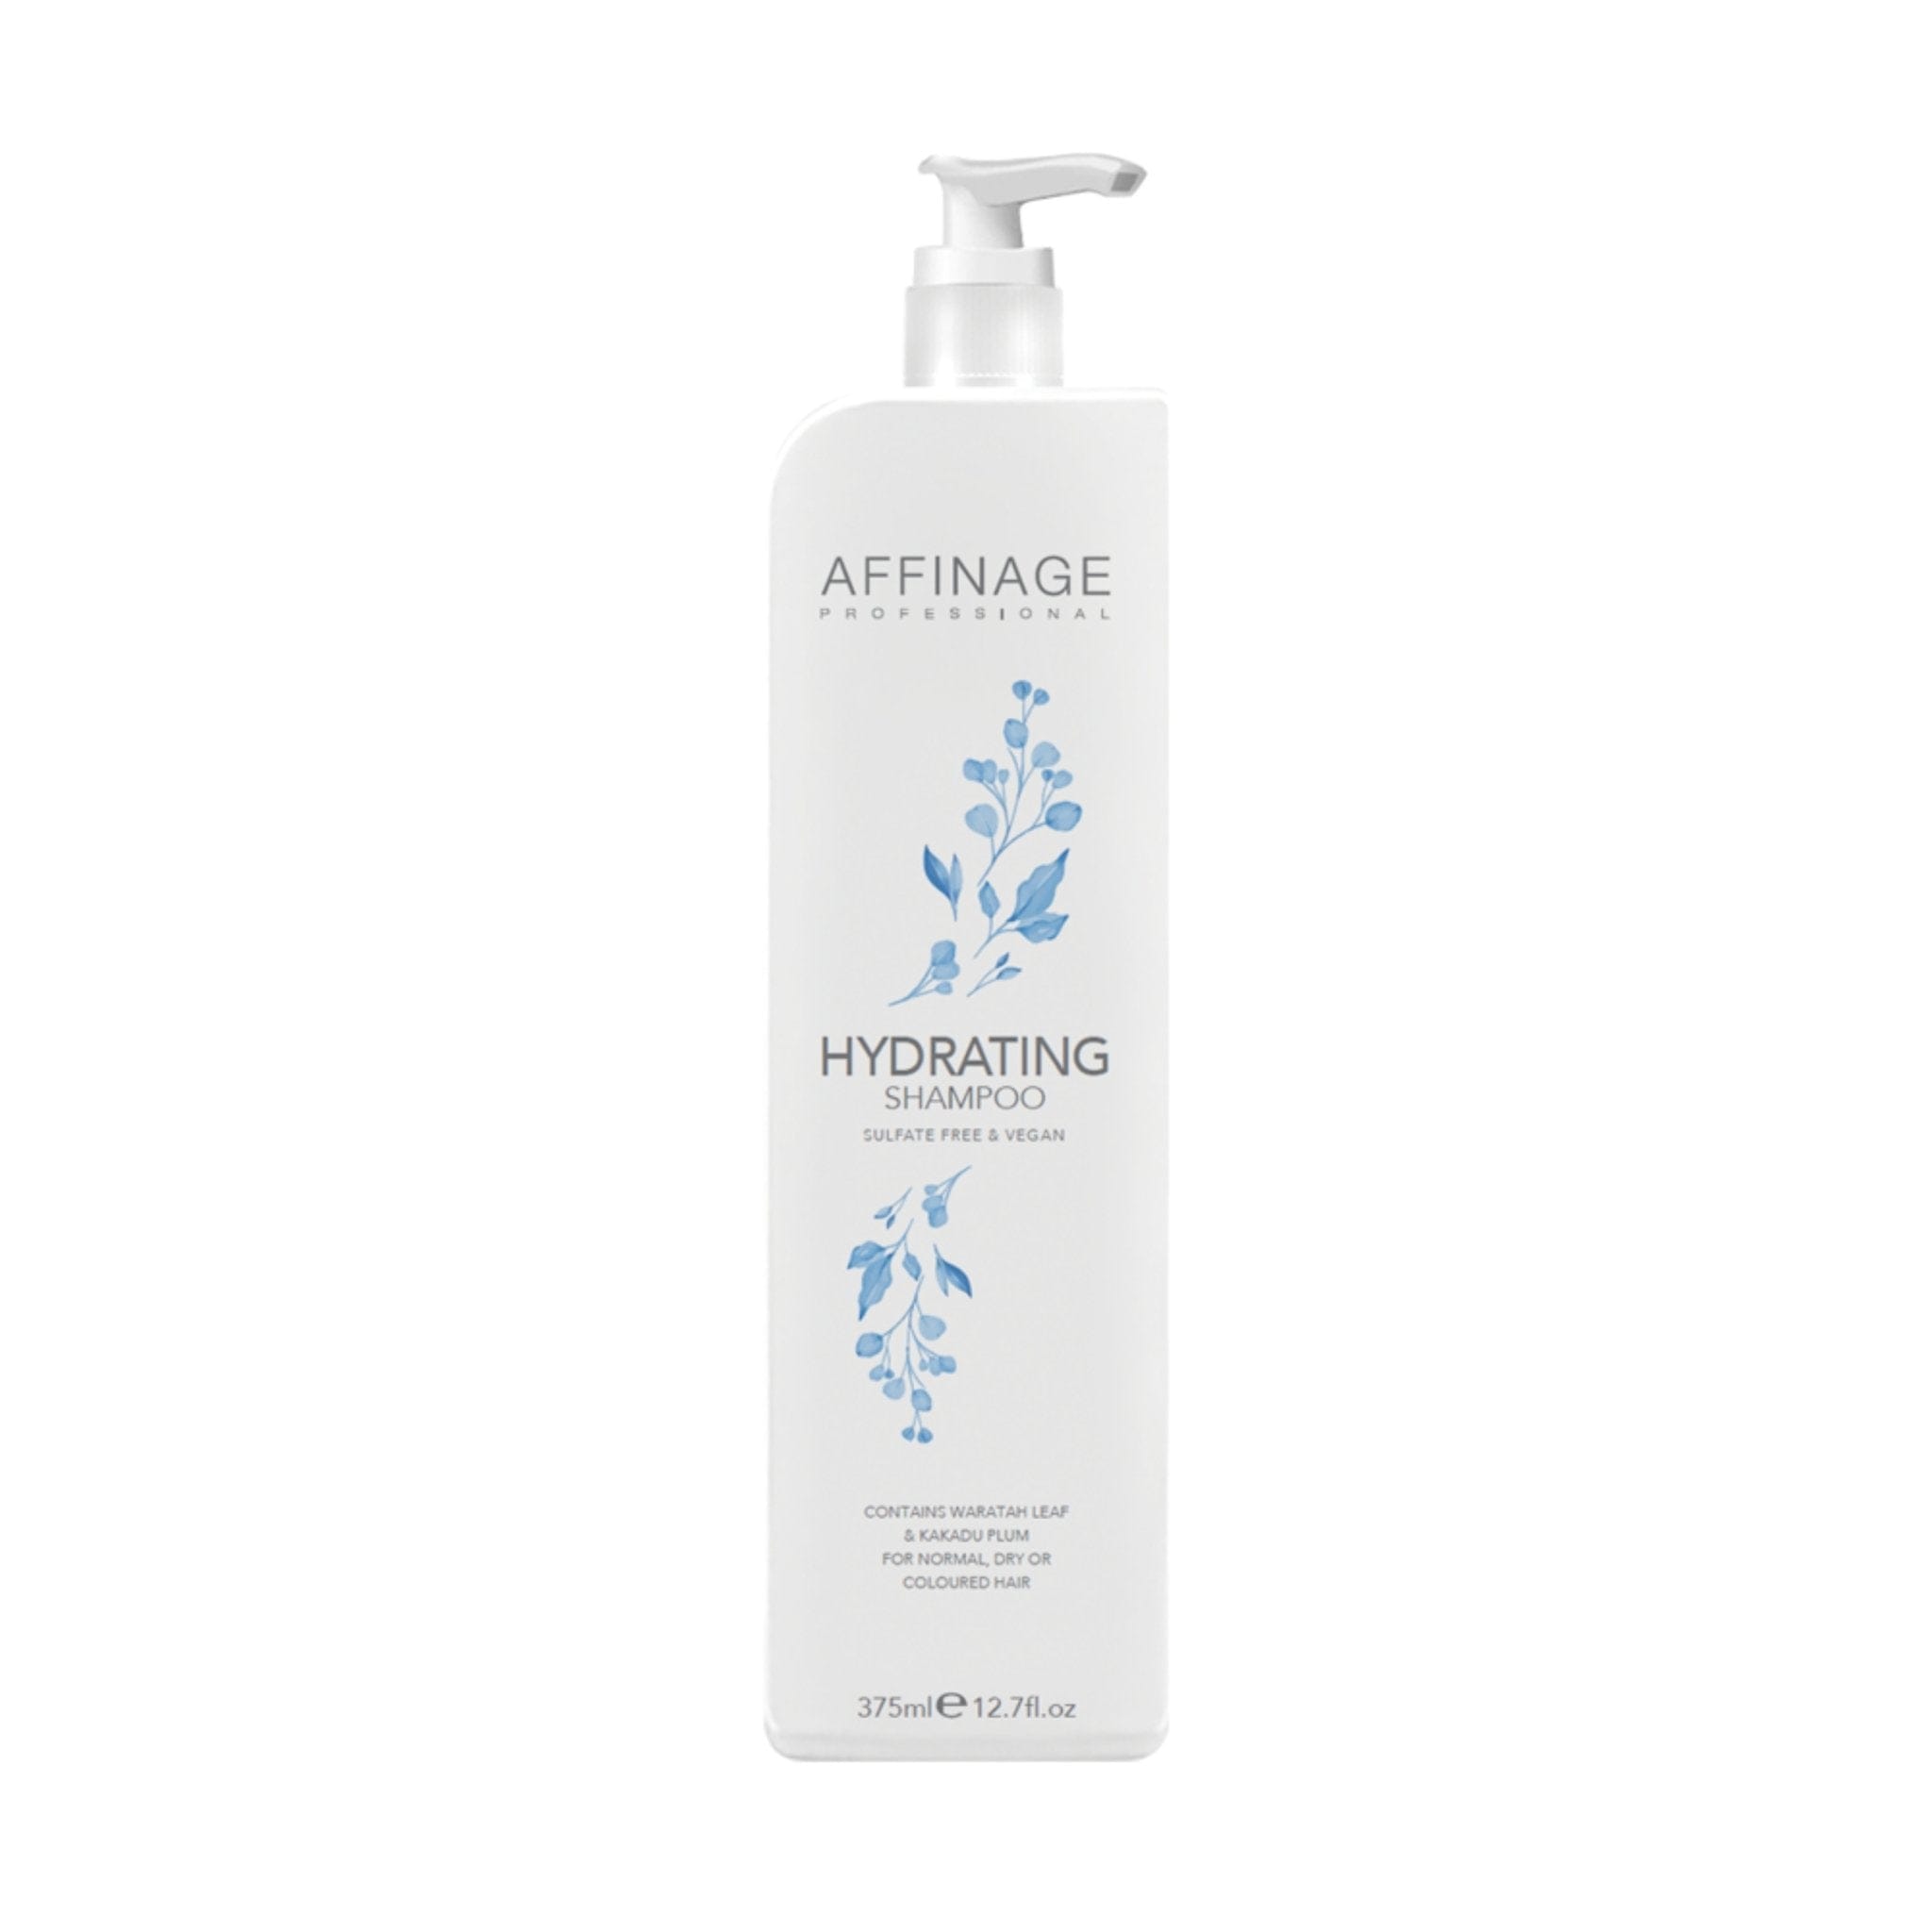 Affinage Cleanse & Care Hydrating Shampoo - HairBeautyInk